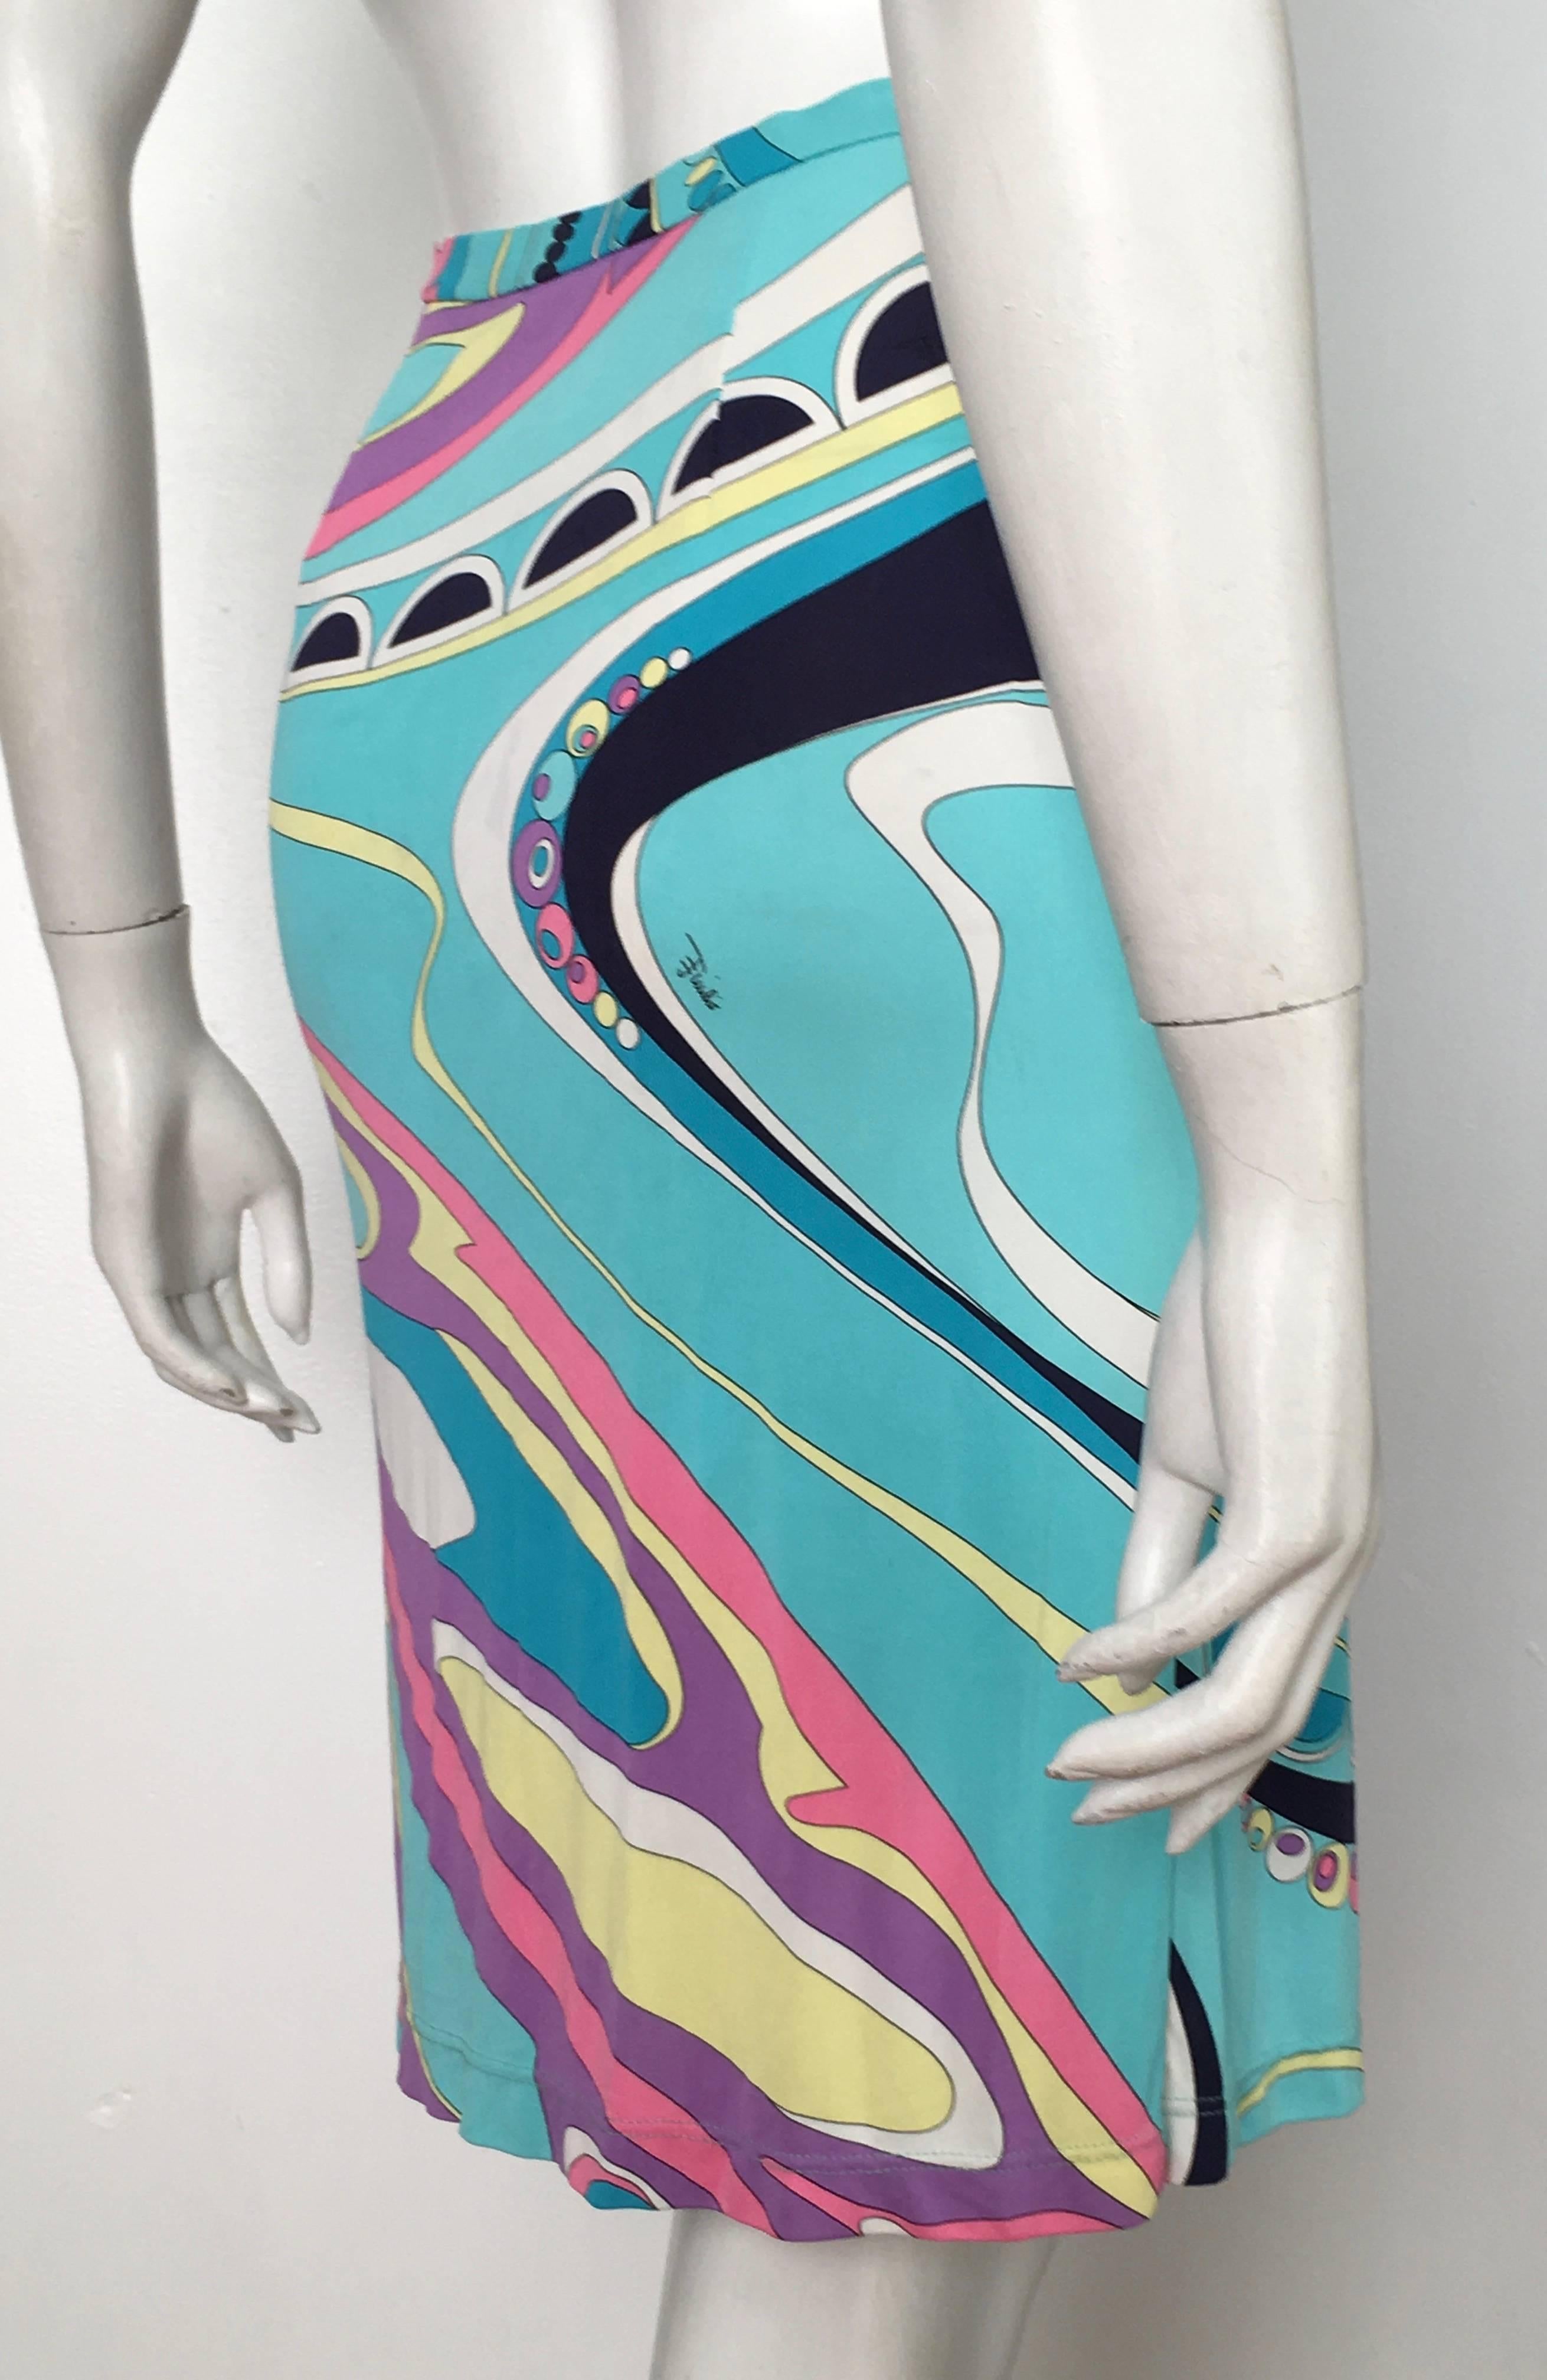 Women's or Men's Emilio Pucci Sexy Skirt Size 4.